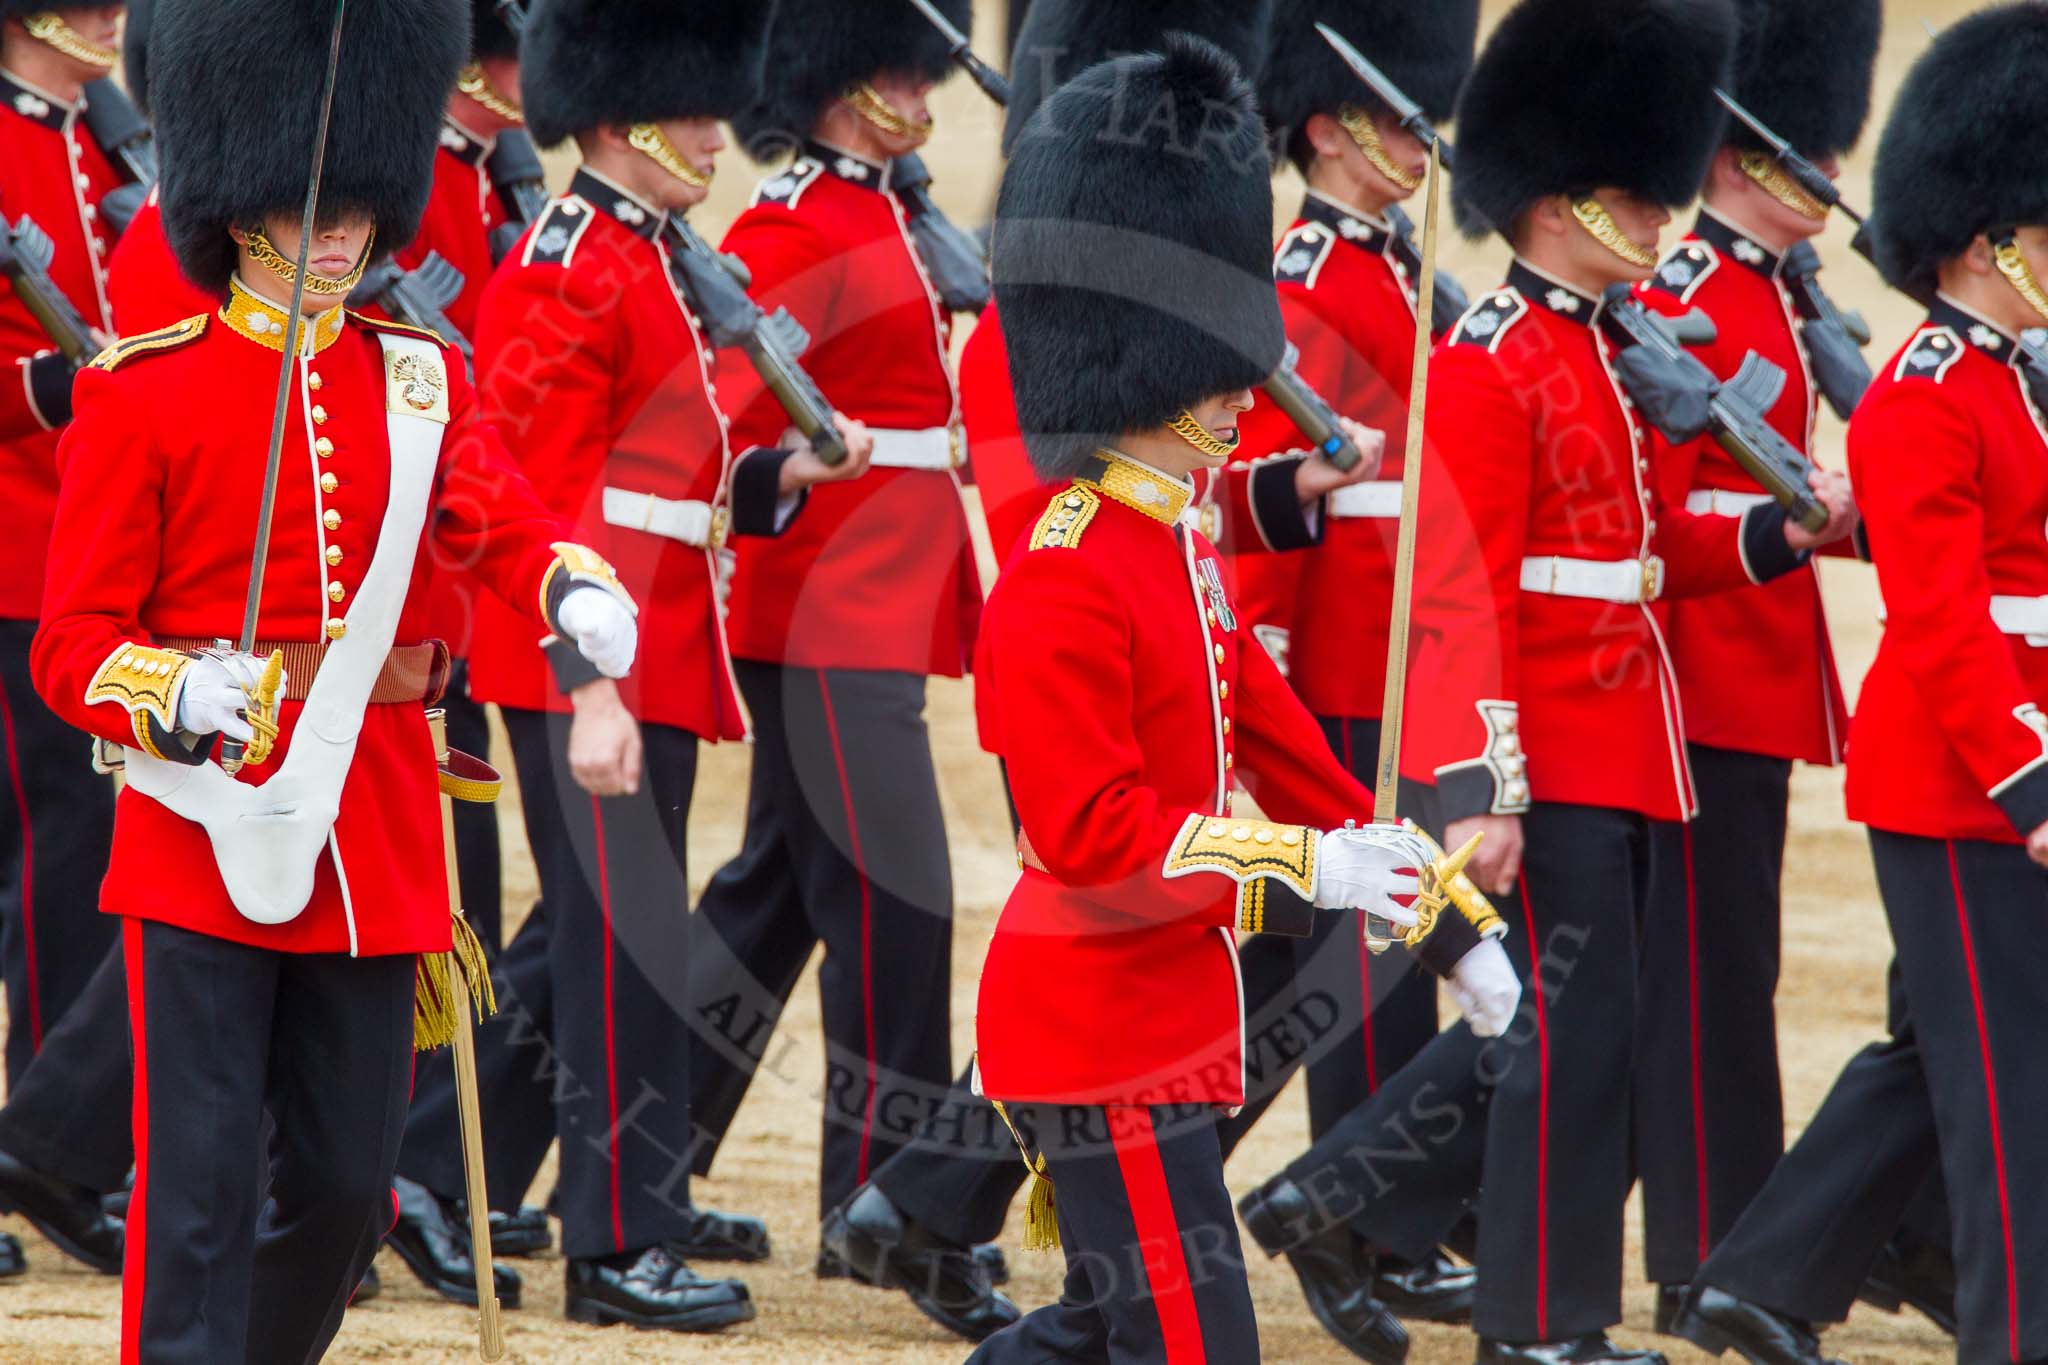 Trooping the Colour 2014.
Horse Guards Parade, Westminster,
London SW1A,

United Kingdom,
on 14 June 2014 at 11:18, image #505